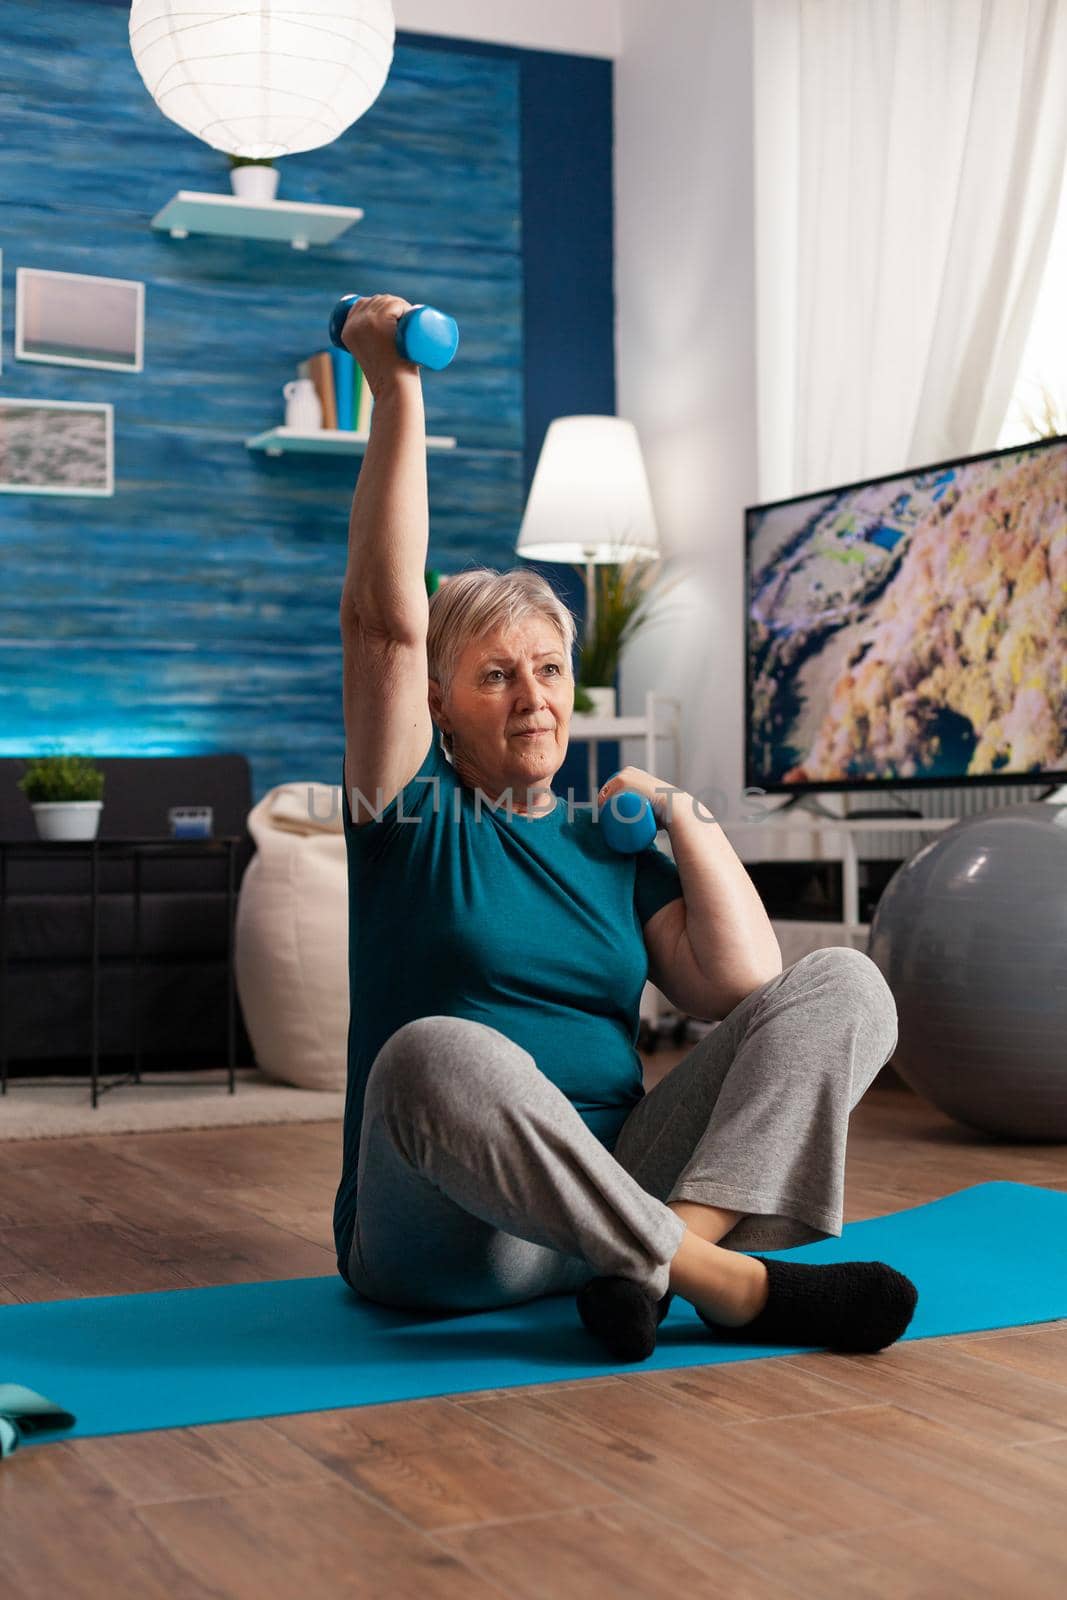 Retired senior woman sitting on yoga mat in lotus position raising hand during wellness routine by DCStudio